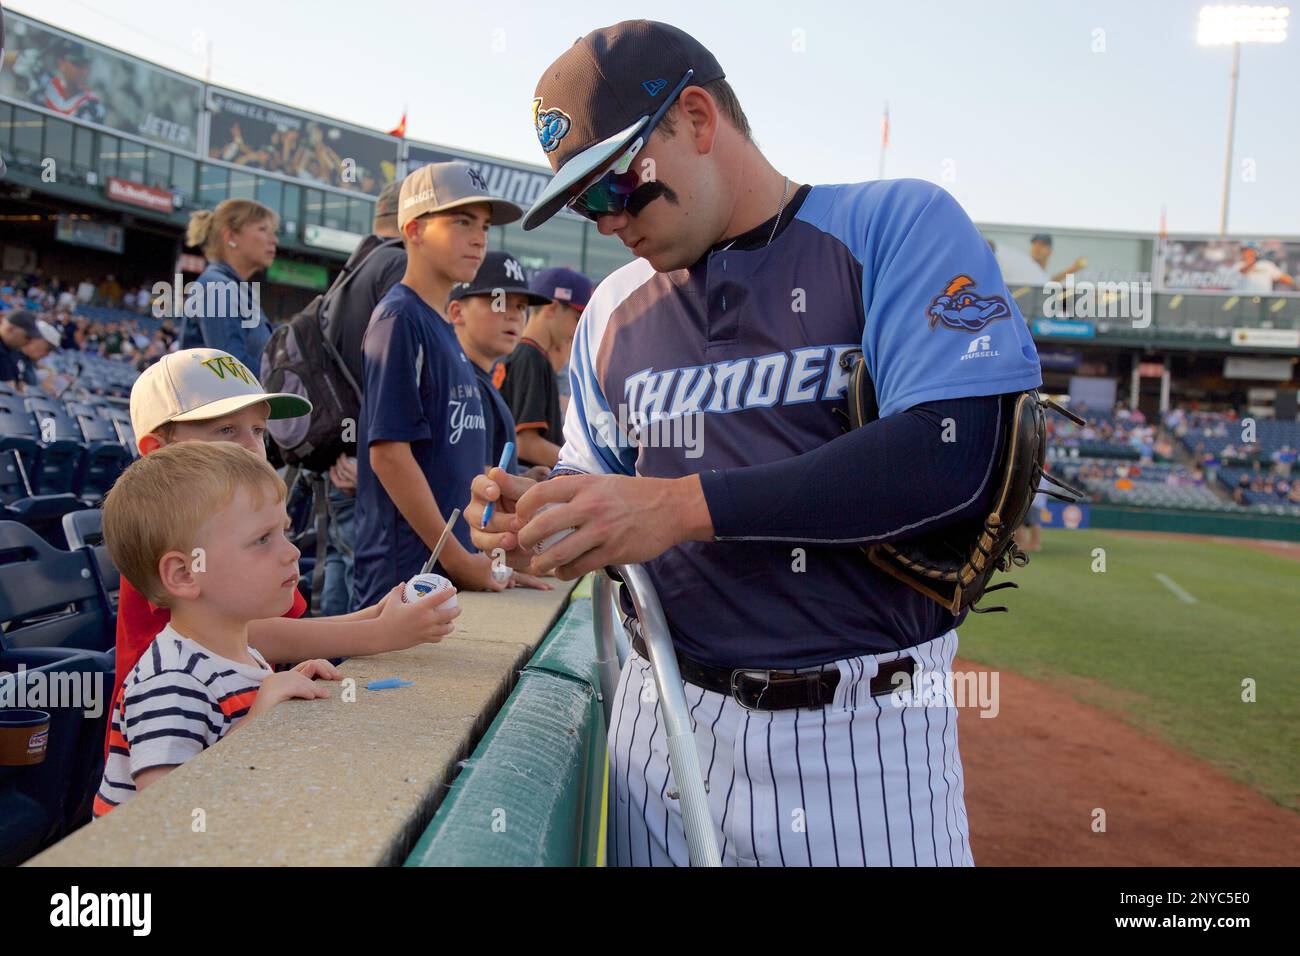 August 26, 2017 - Trenton, New Jersey, U.S - DANTE BICHETTE JR., an  infielder for the Trenton Thunder, signs autographs for kids before the  game vs. the Richmond Flying Squirrels at ARM